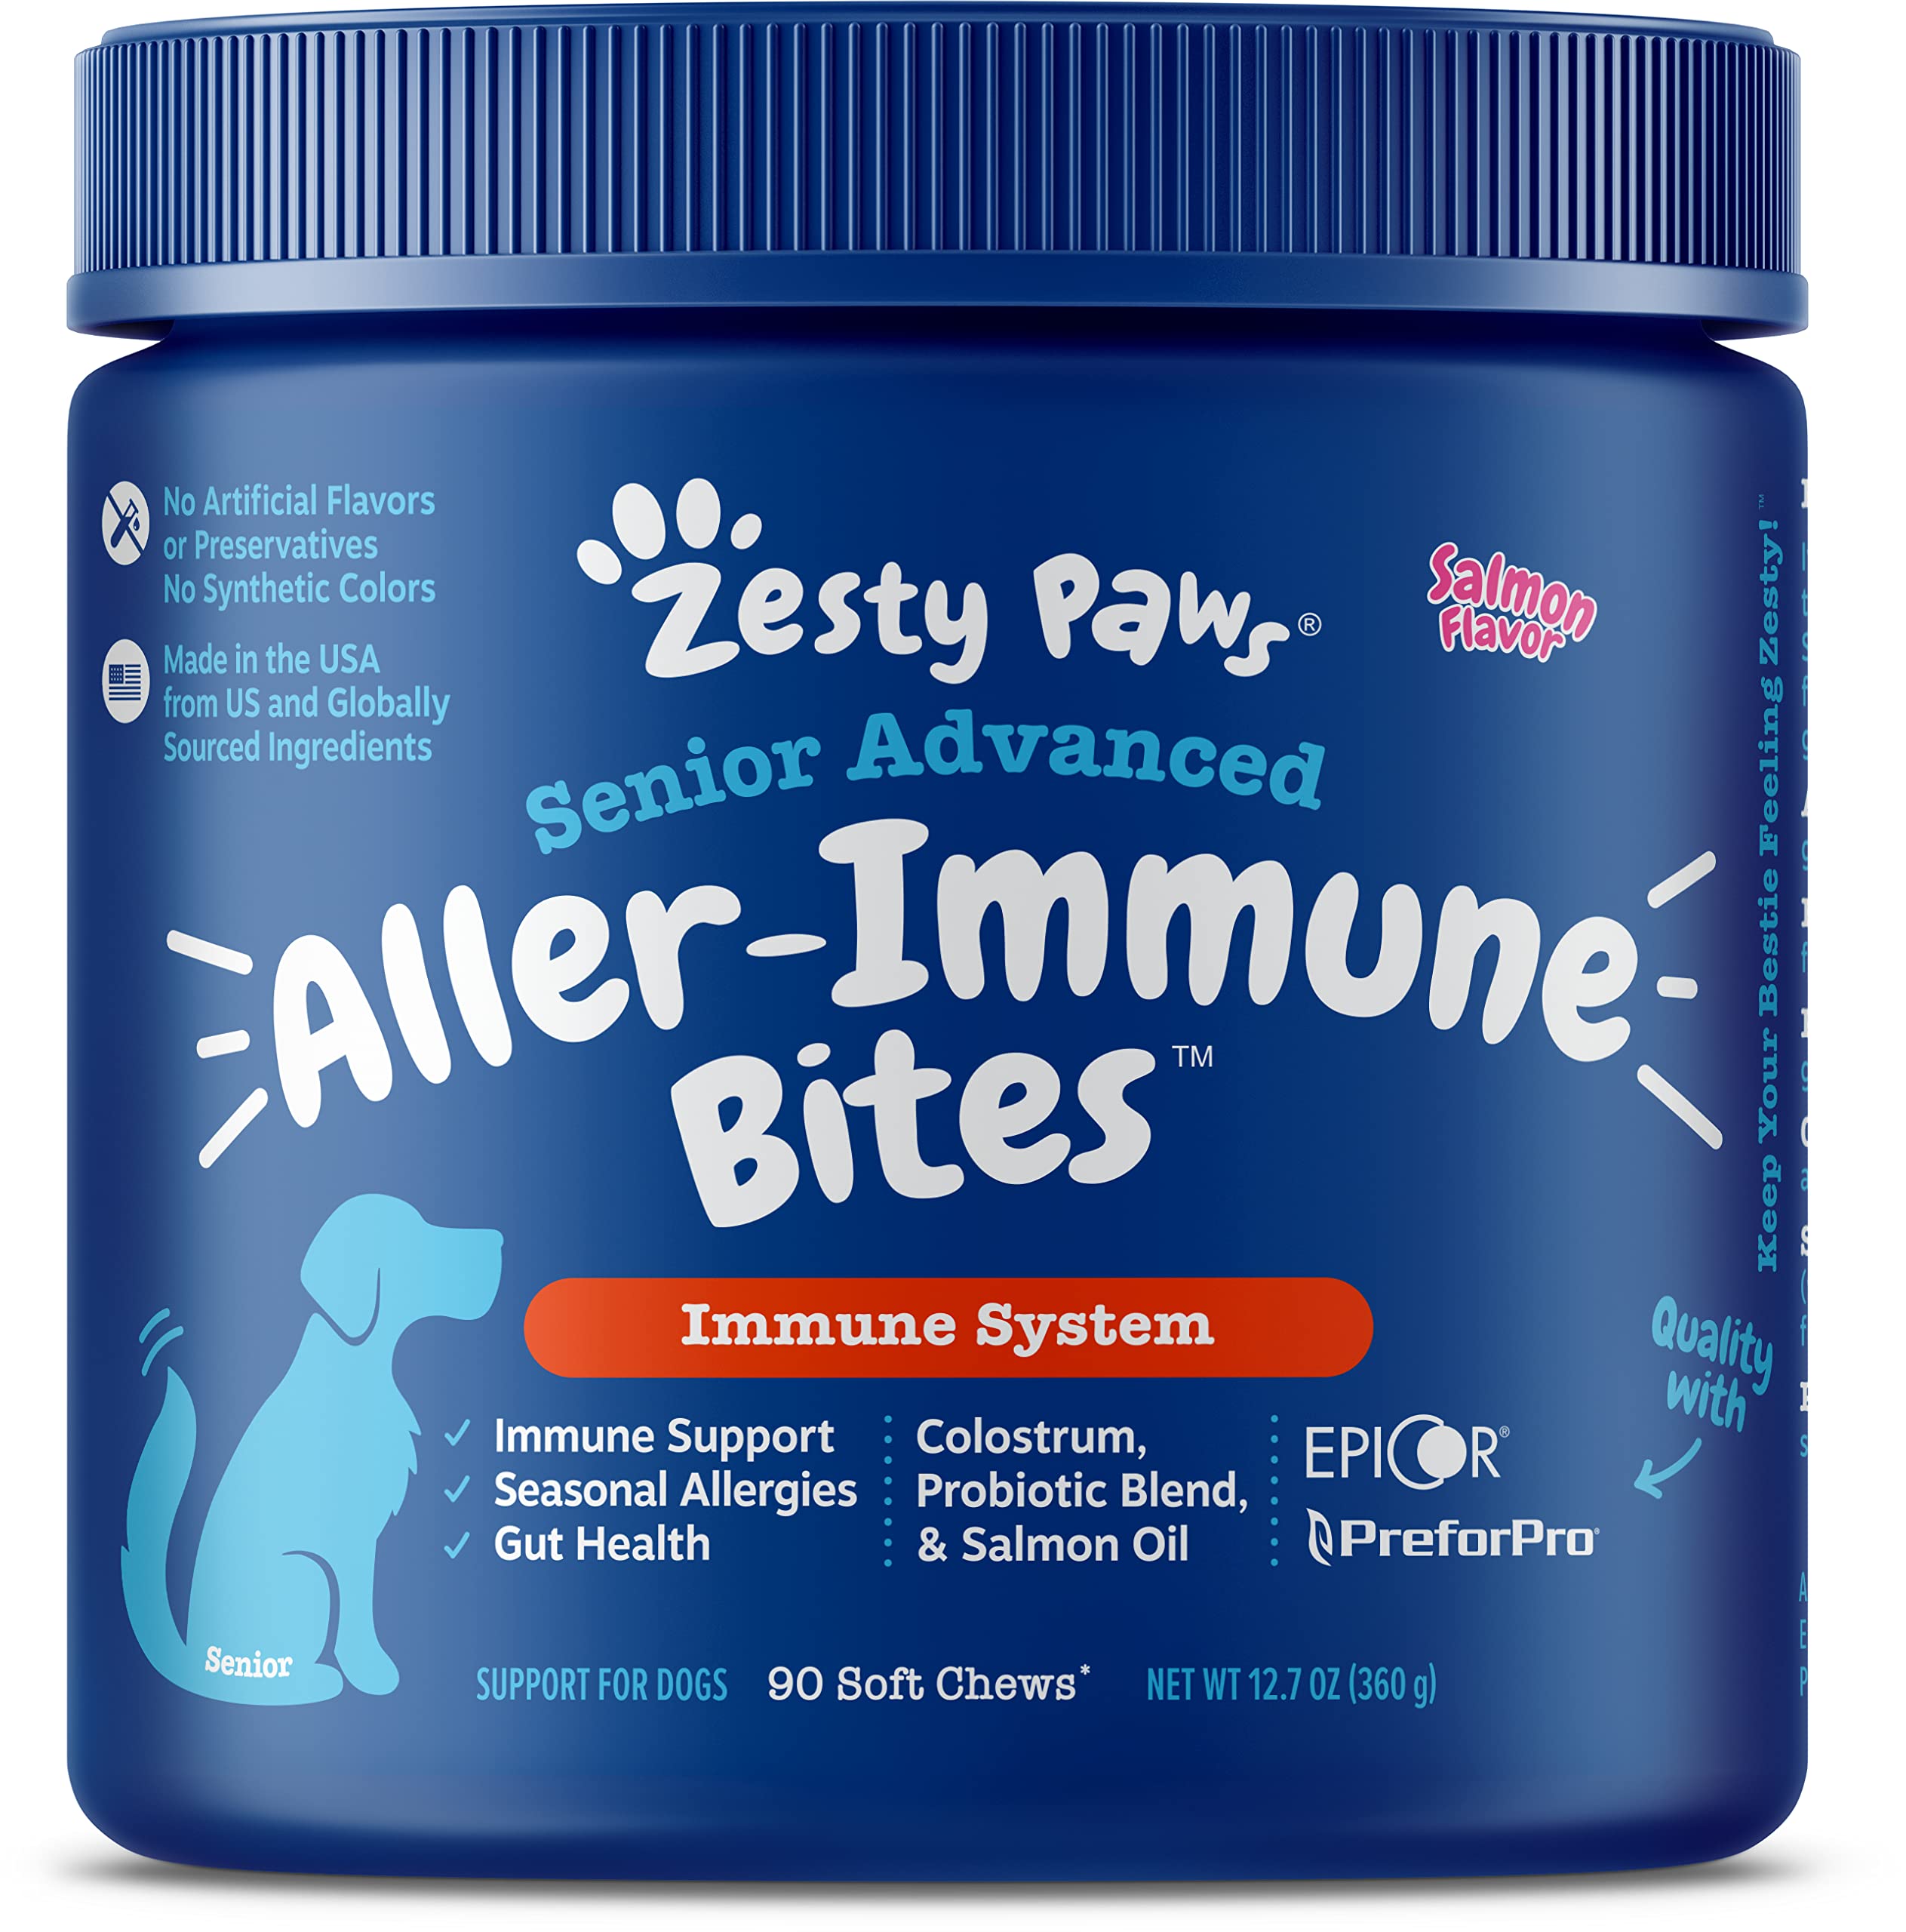 Zesty Paws Advanced Allergy Immune Supplement for Dogs - with Omega 3 Wild Alaskan Salmon Fish Oil Quercetin & Epicor + Digestiv